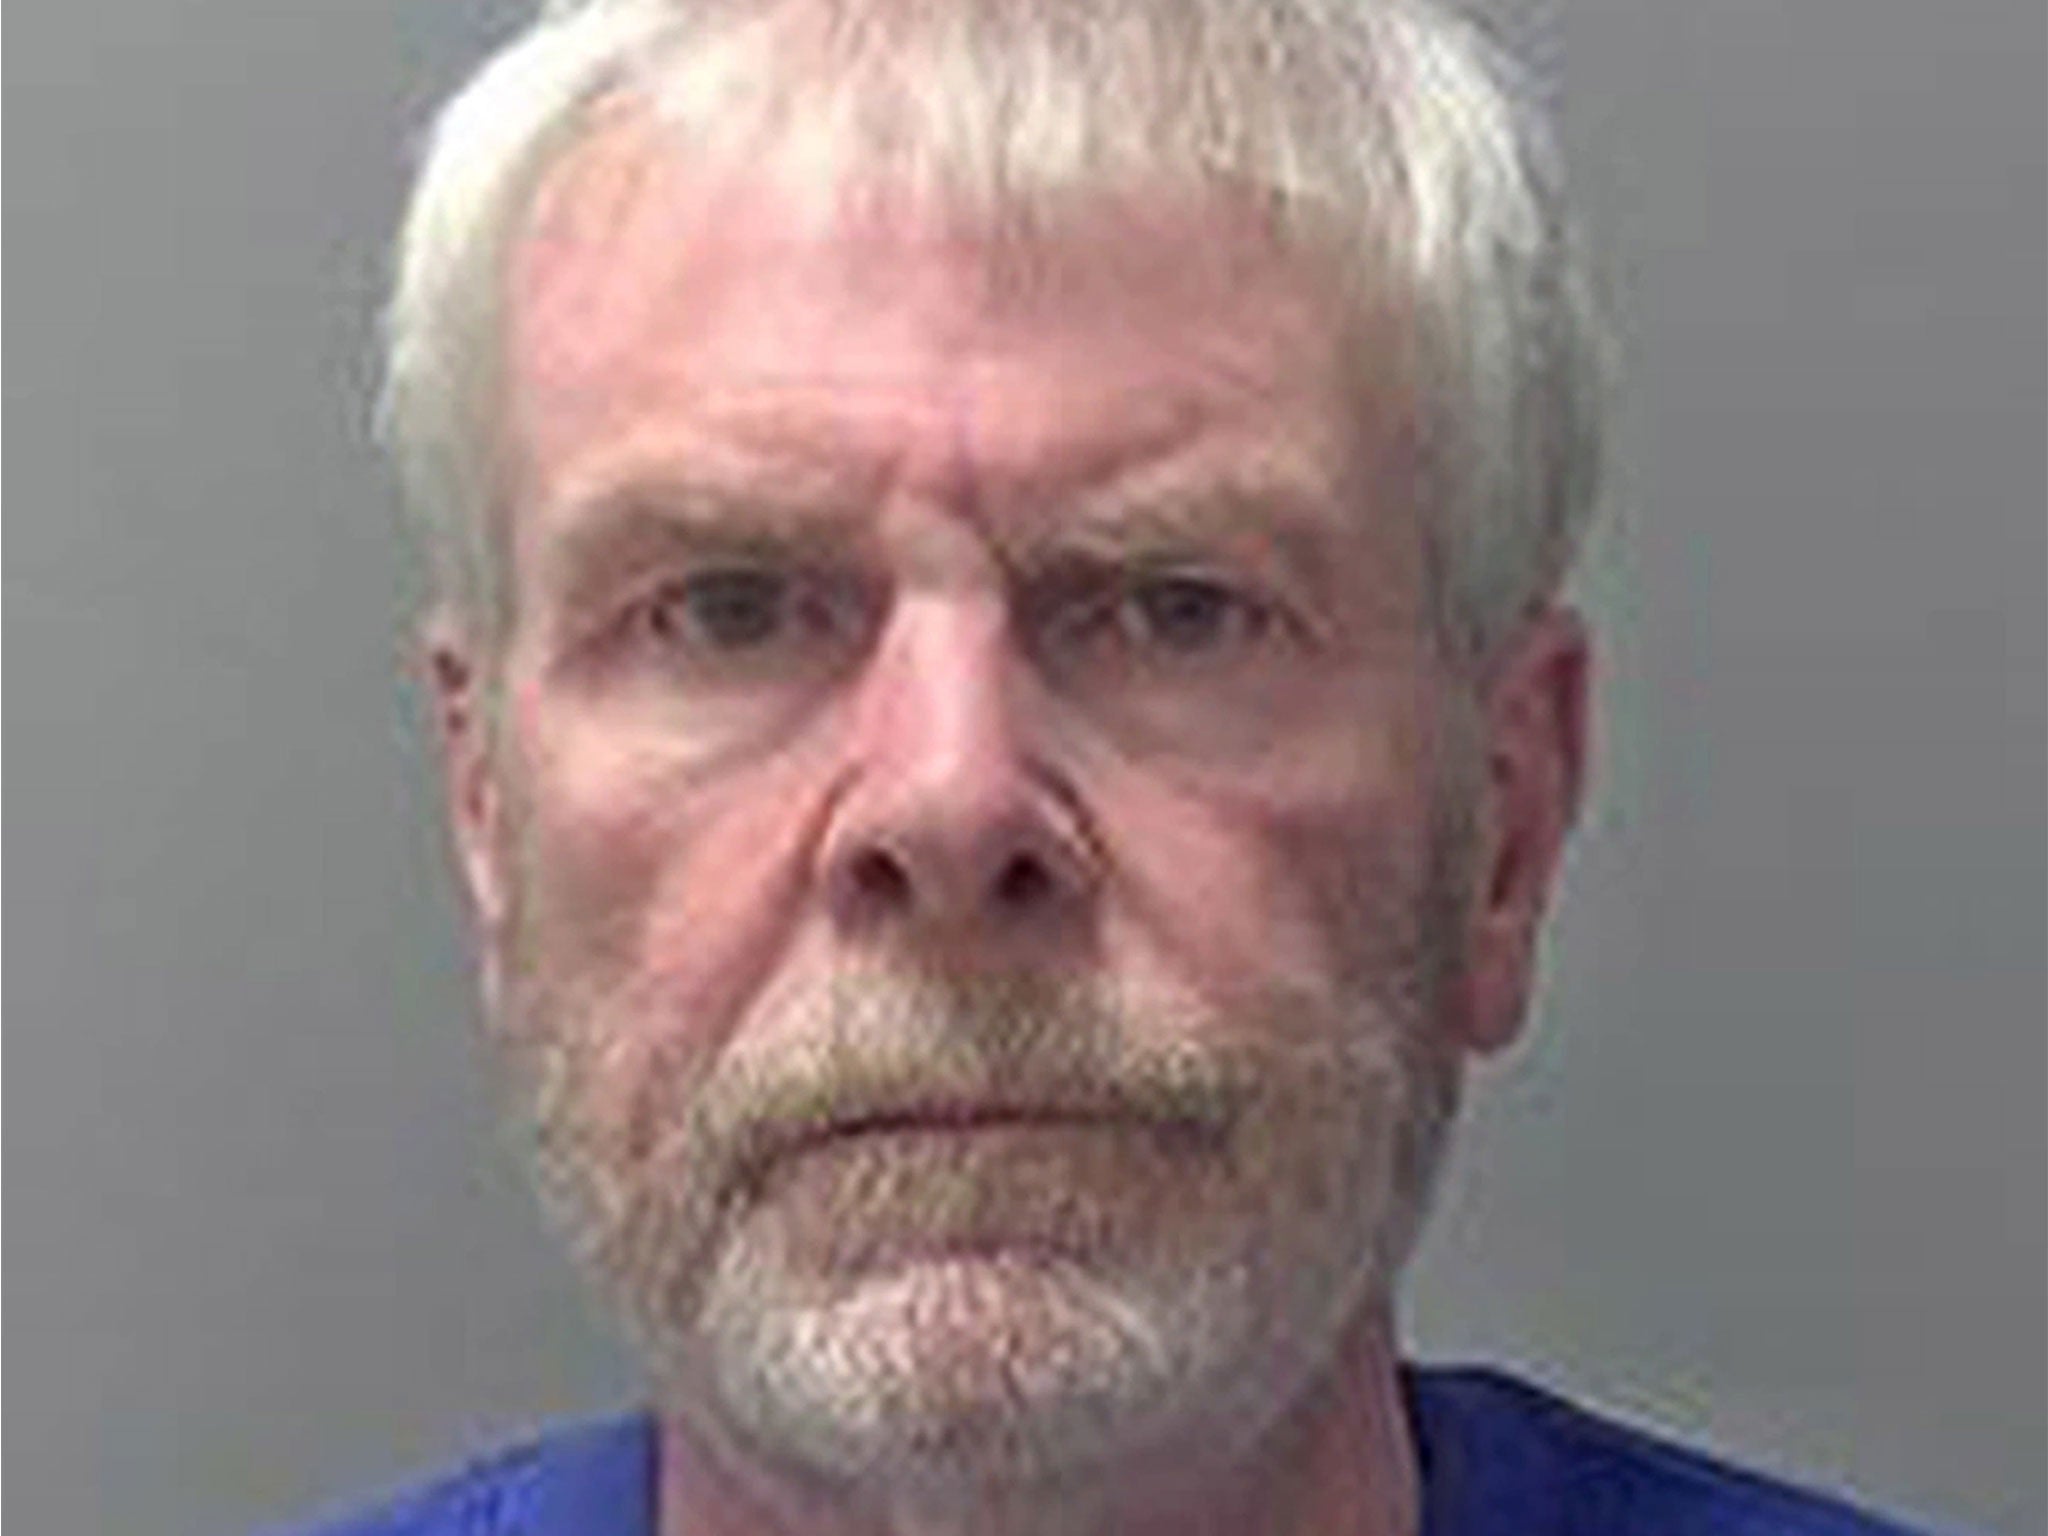 Former Ukip councillor found guilty of murdering his wife